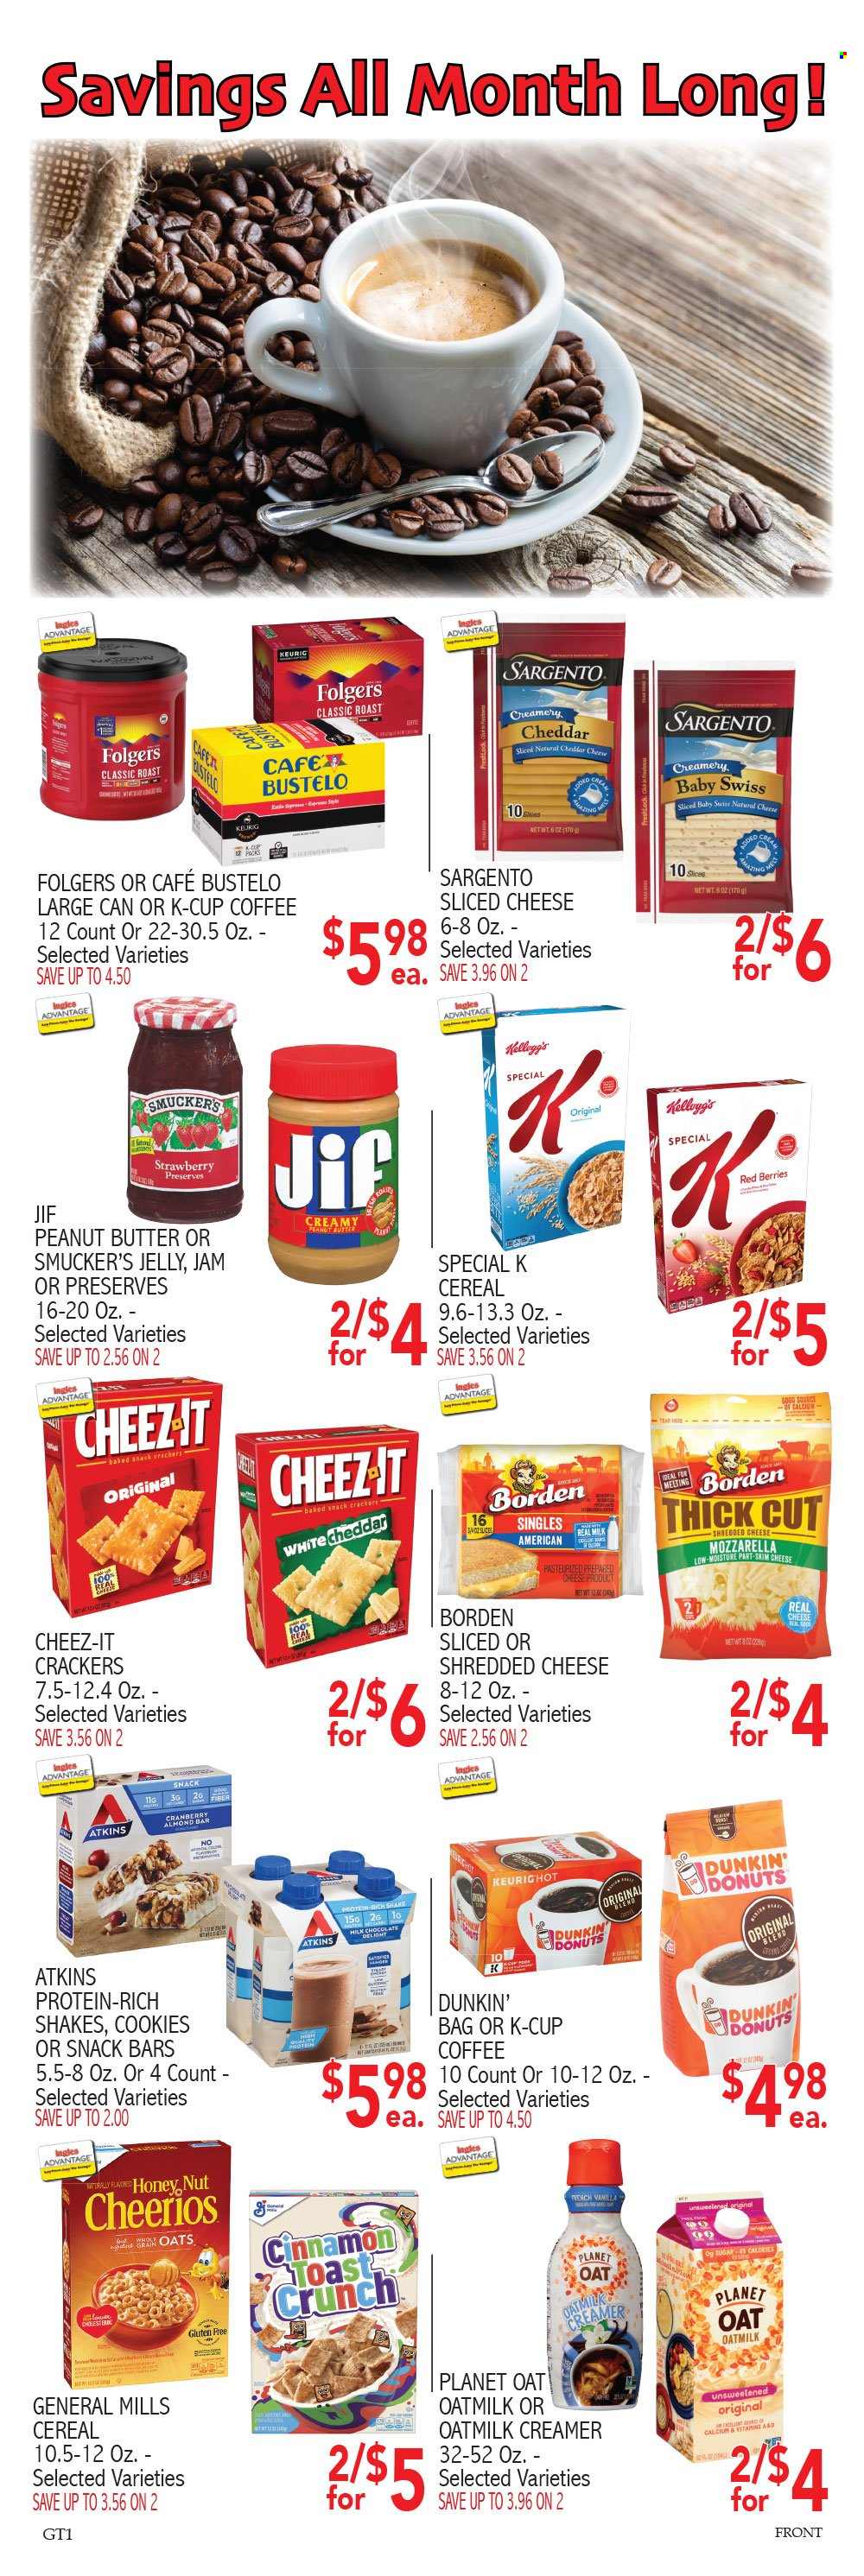 thumbnail - Ingles Flyer - 01/12/2022 - 01/18/2022 - Sales products - Dunkin' Donuts, mozzarella, shredded cheese, sliced cheese, Sargento, milk, shake, oat milk, creamer, cookies, jelly, crackers, Kellogg's, snack bar, Cheez-It, sugar, cereals, Cheerios, cinnamon, fruit jam, peanut butter, Jif, coffee, Folgers, coffee capsules, K-Cups, bag. Page 5.